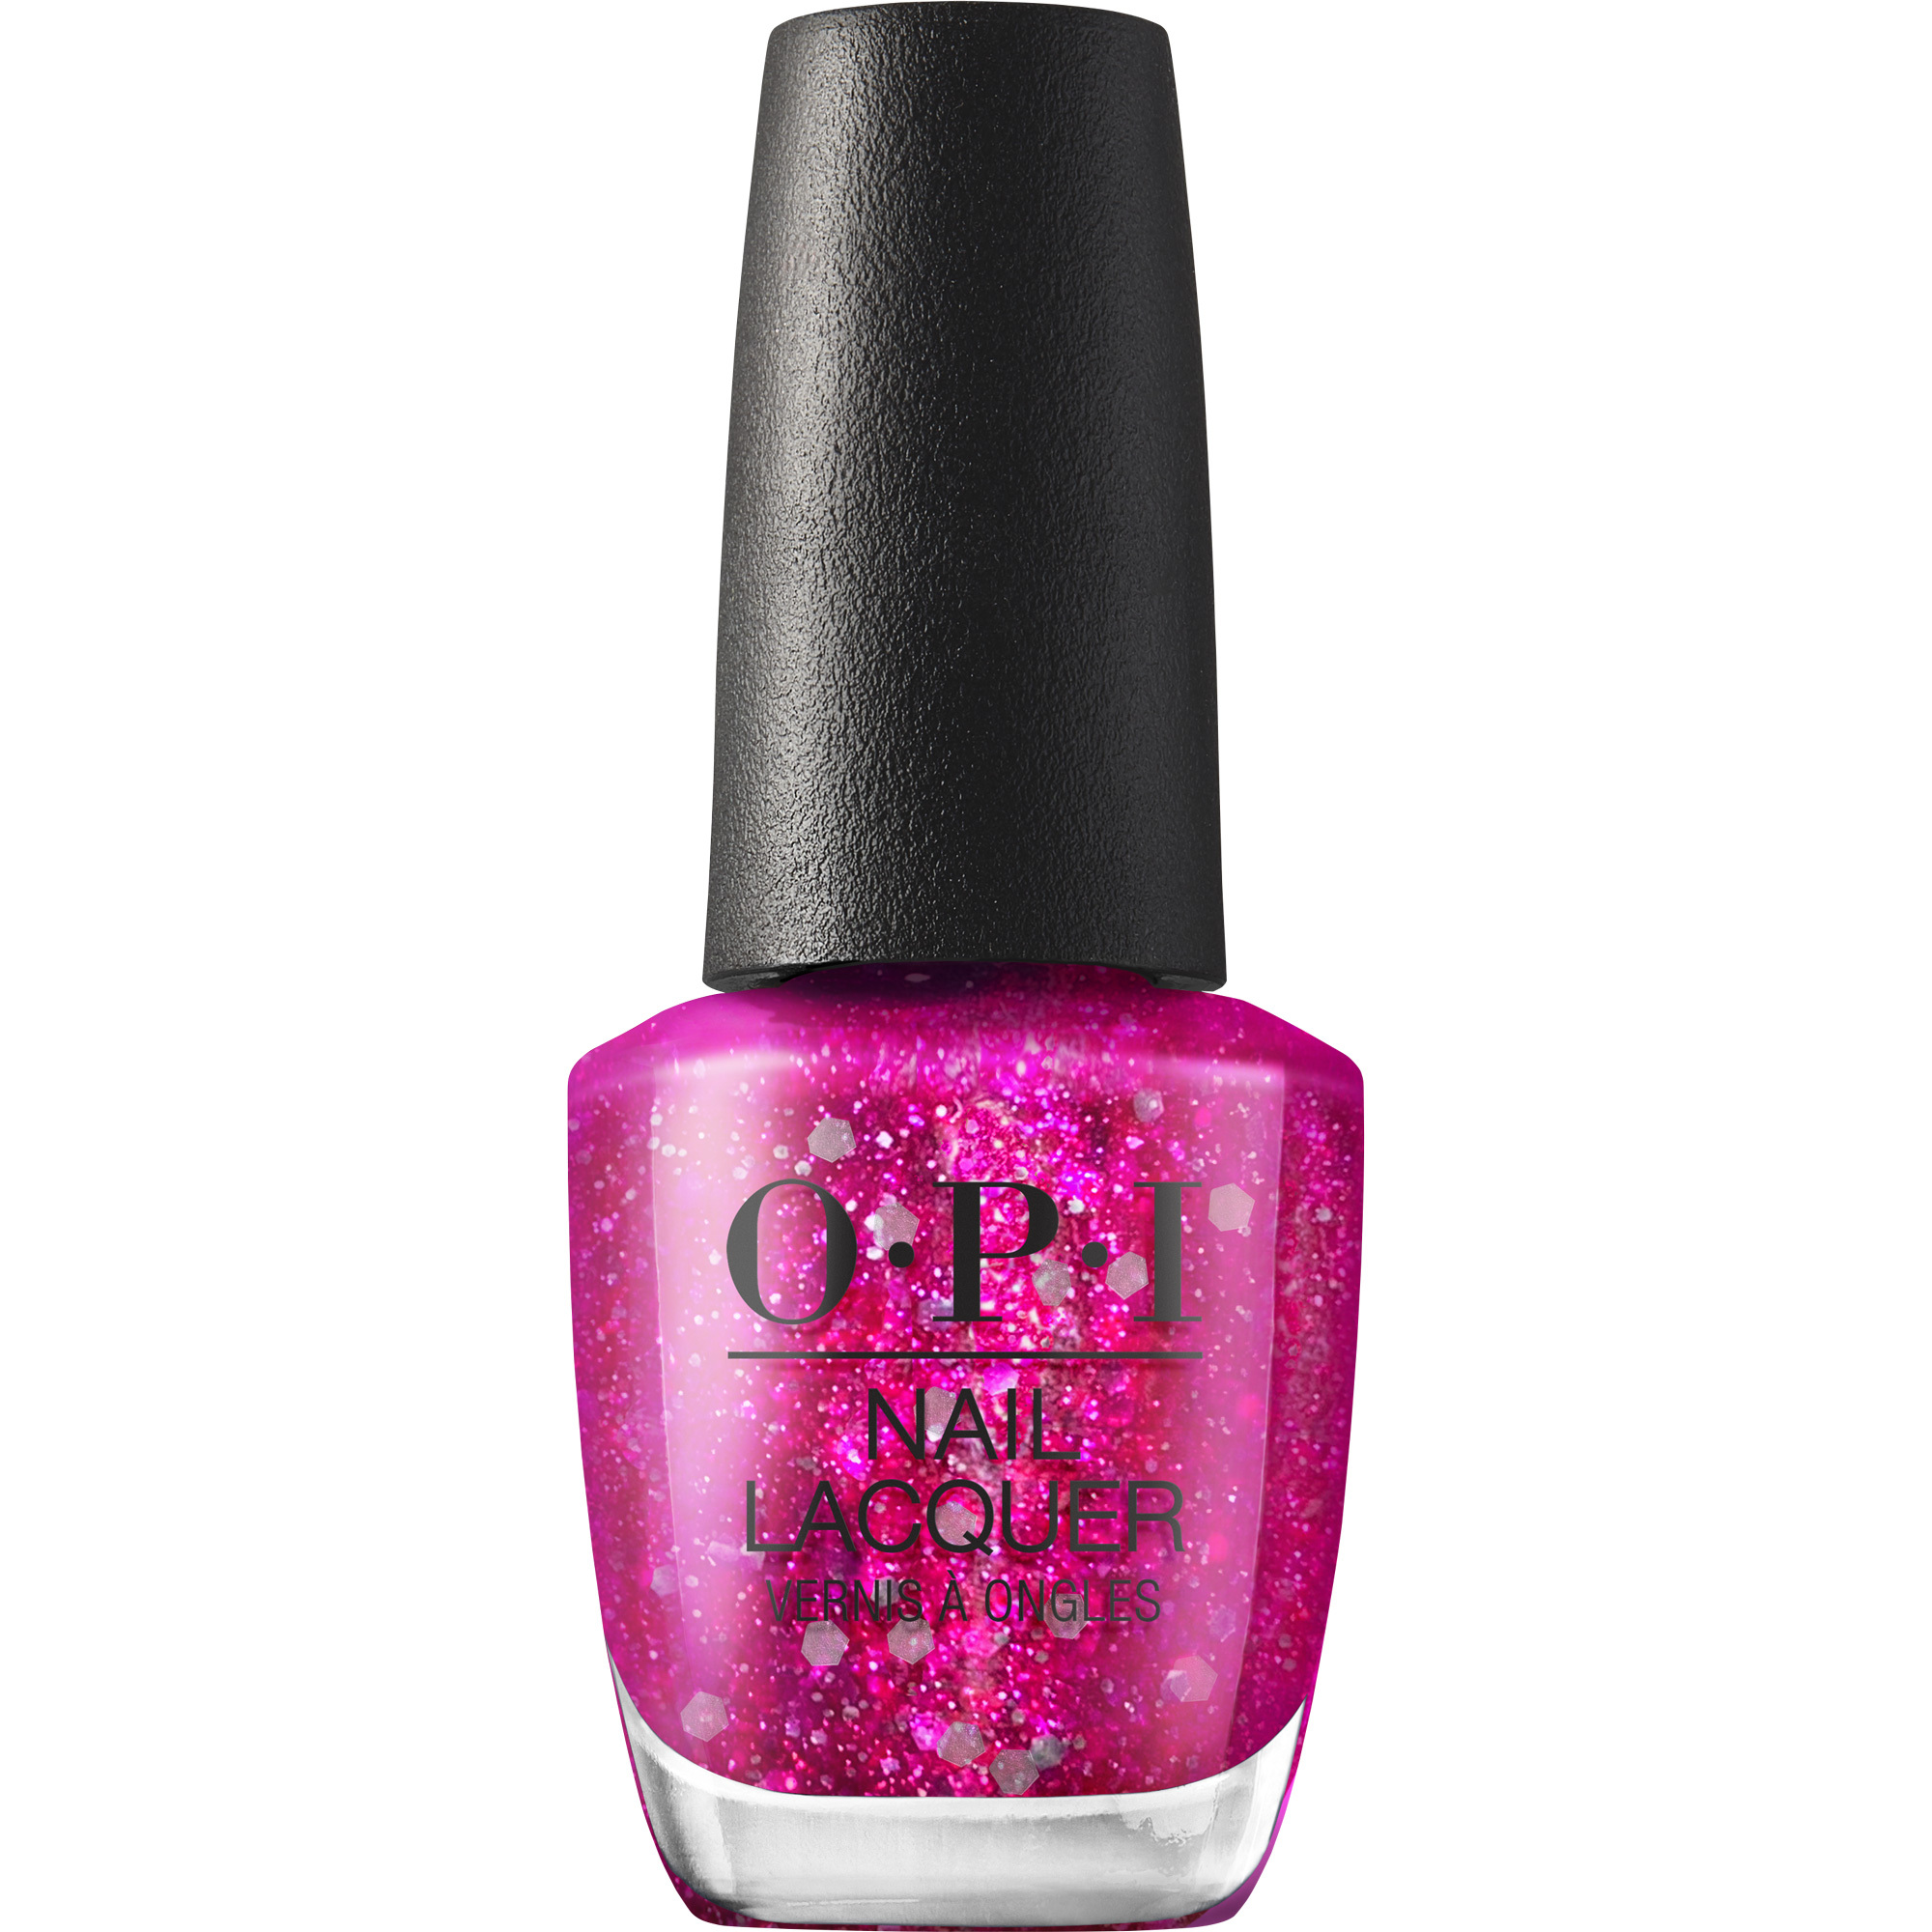 OPI Jewel Be Bold: I Pink It’s Snowing 0.5oz